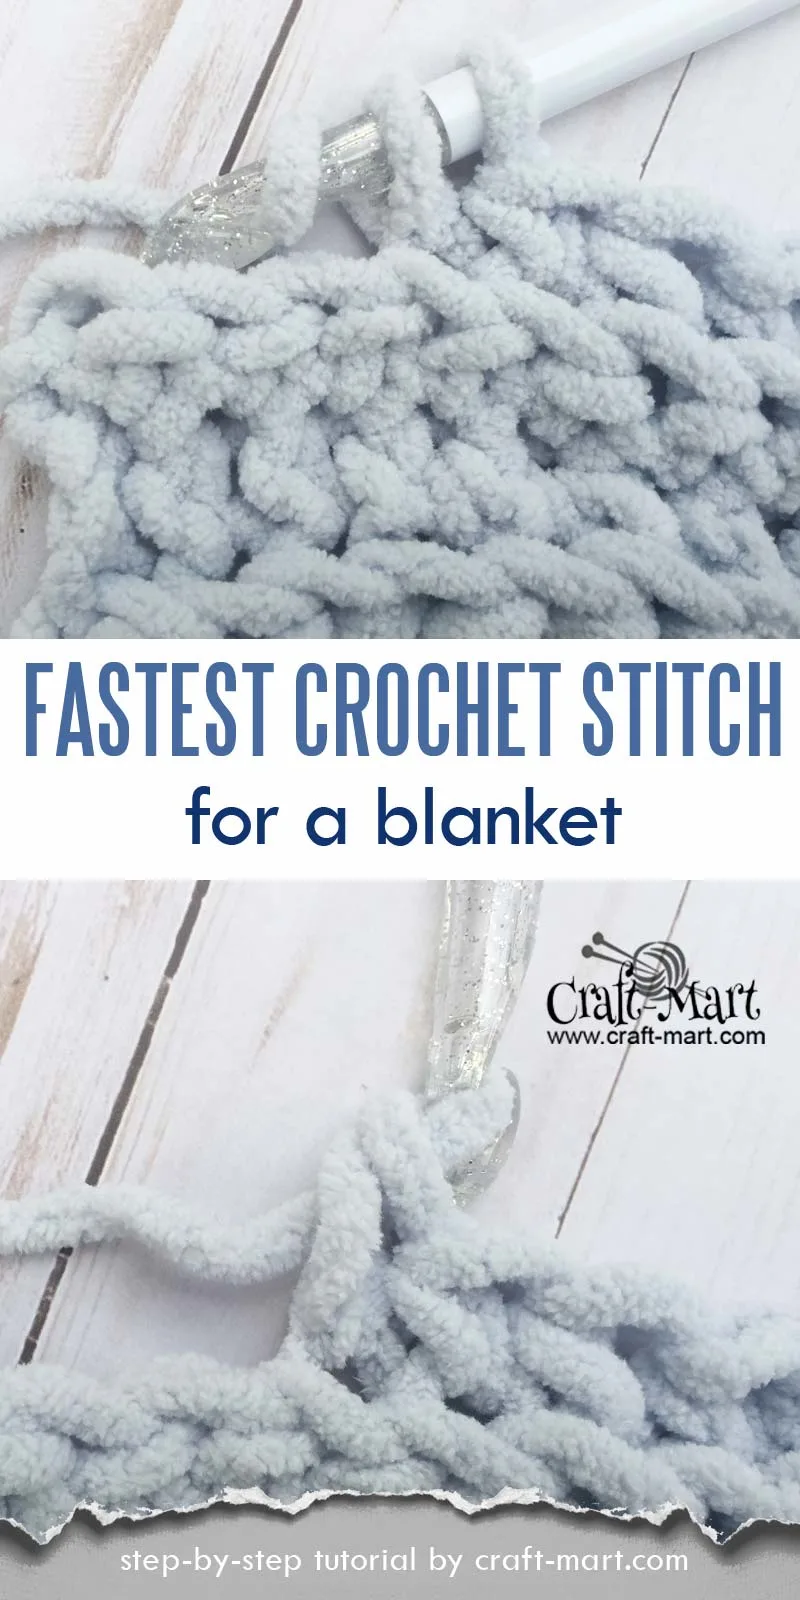 Fastest Crochet Stitch for a Blanket